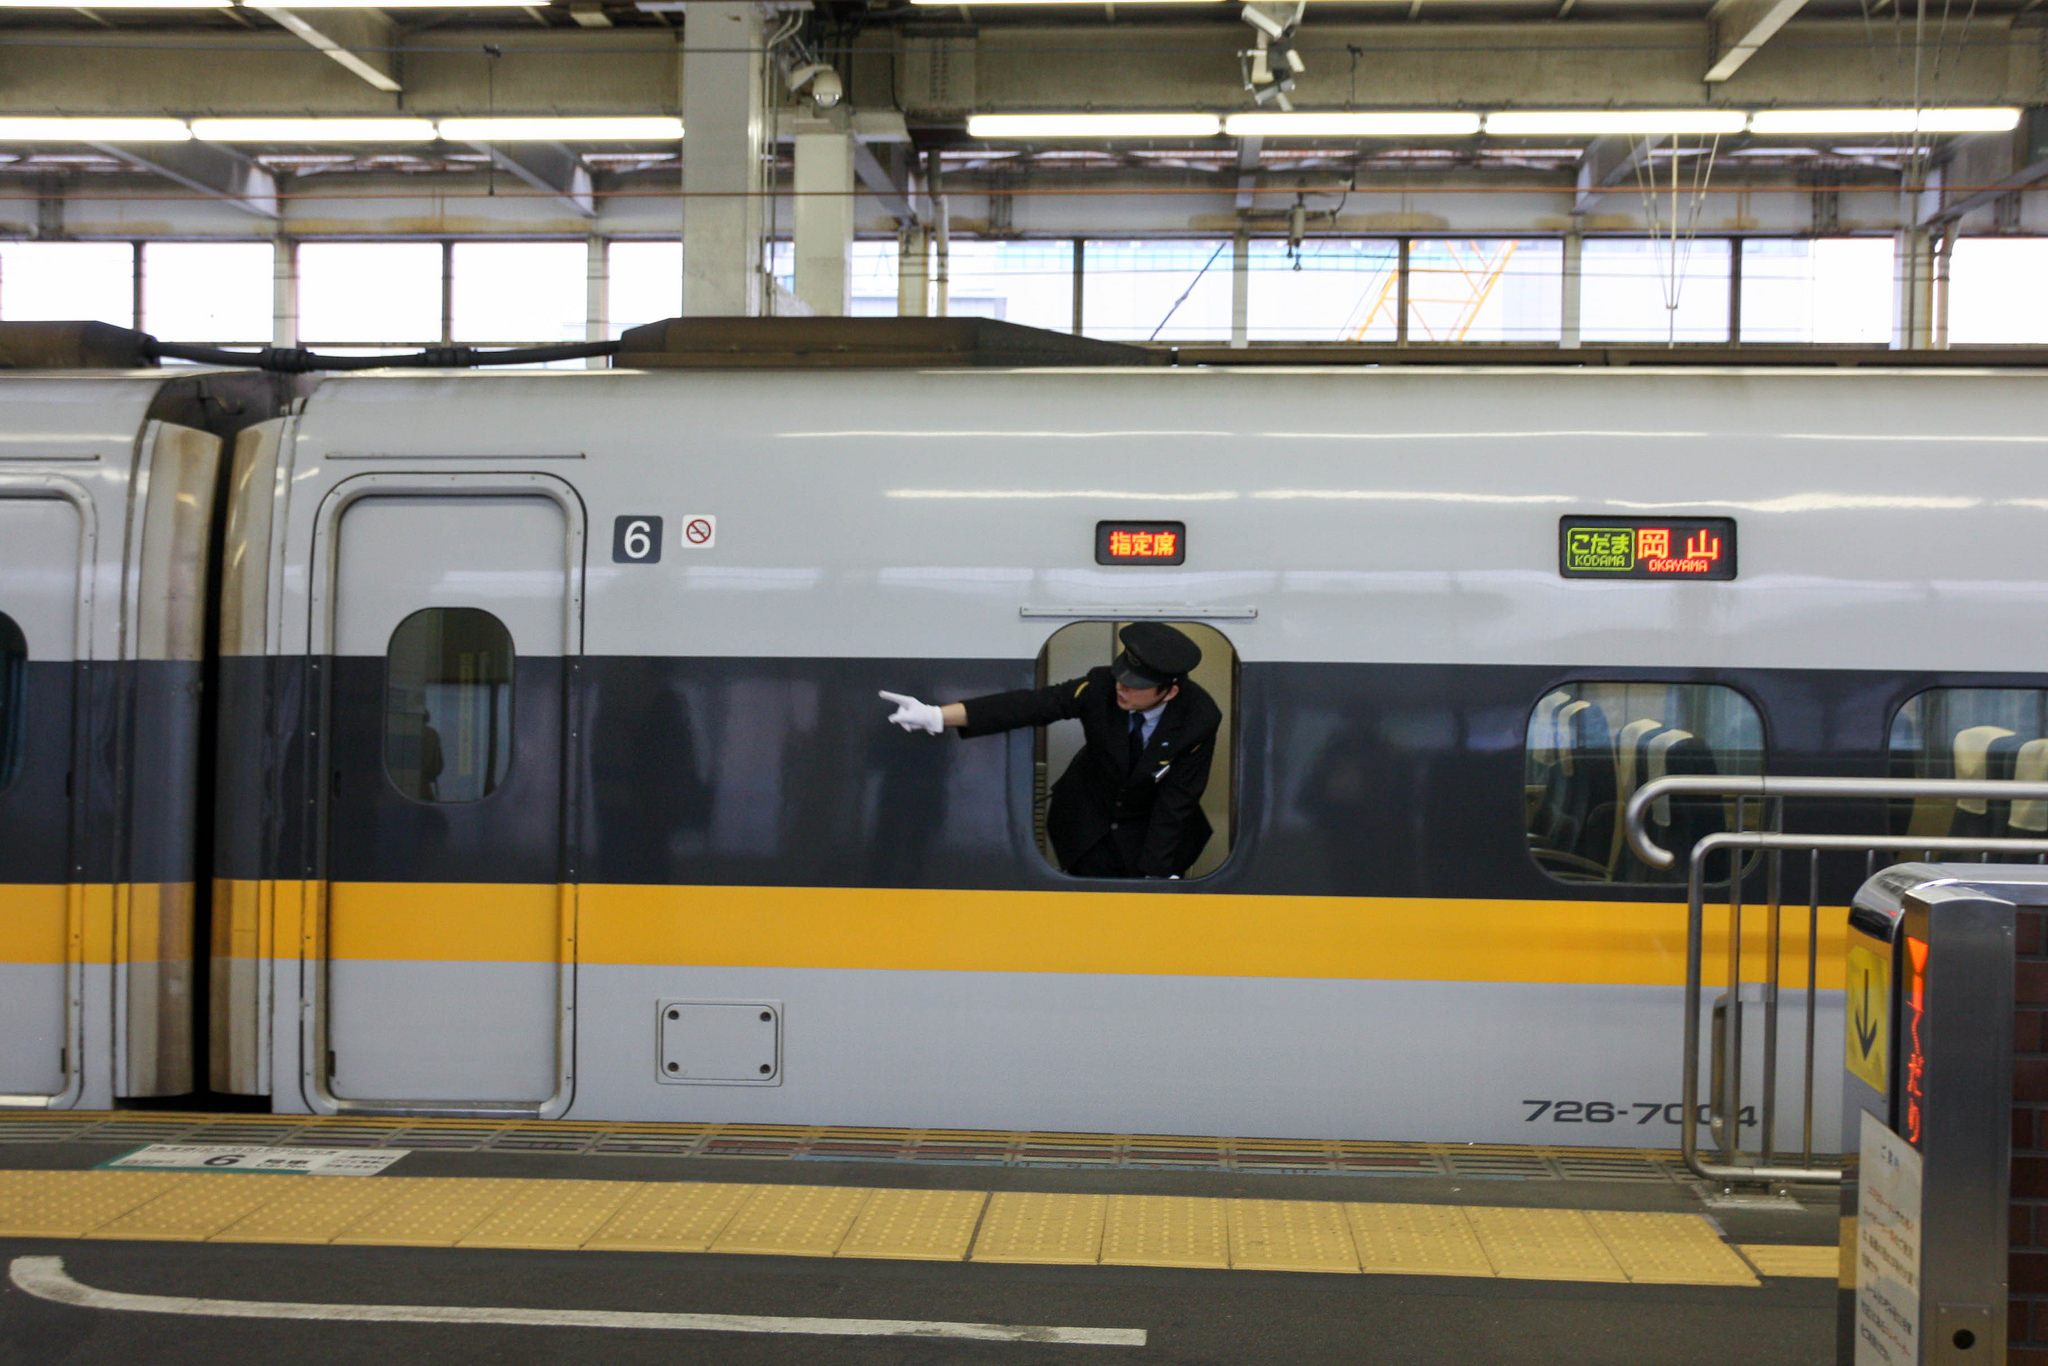 A Hiroshima train conductor pointing along the track.